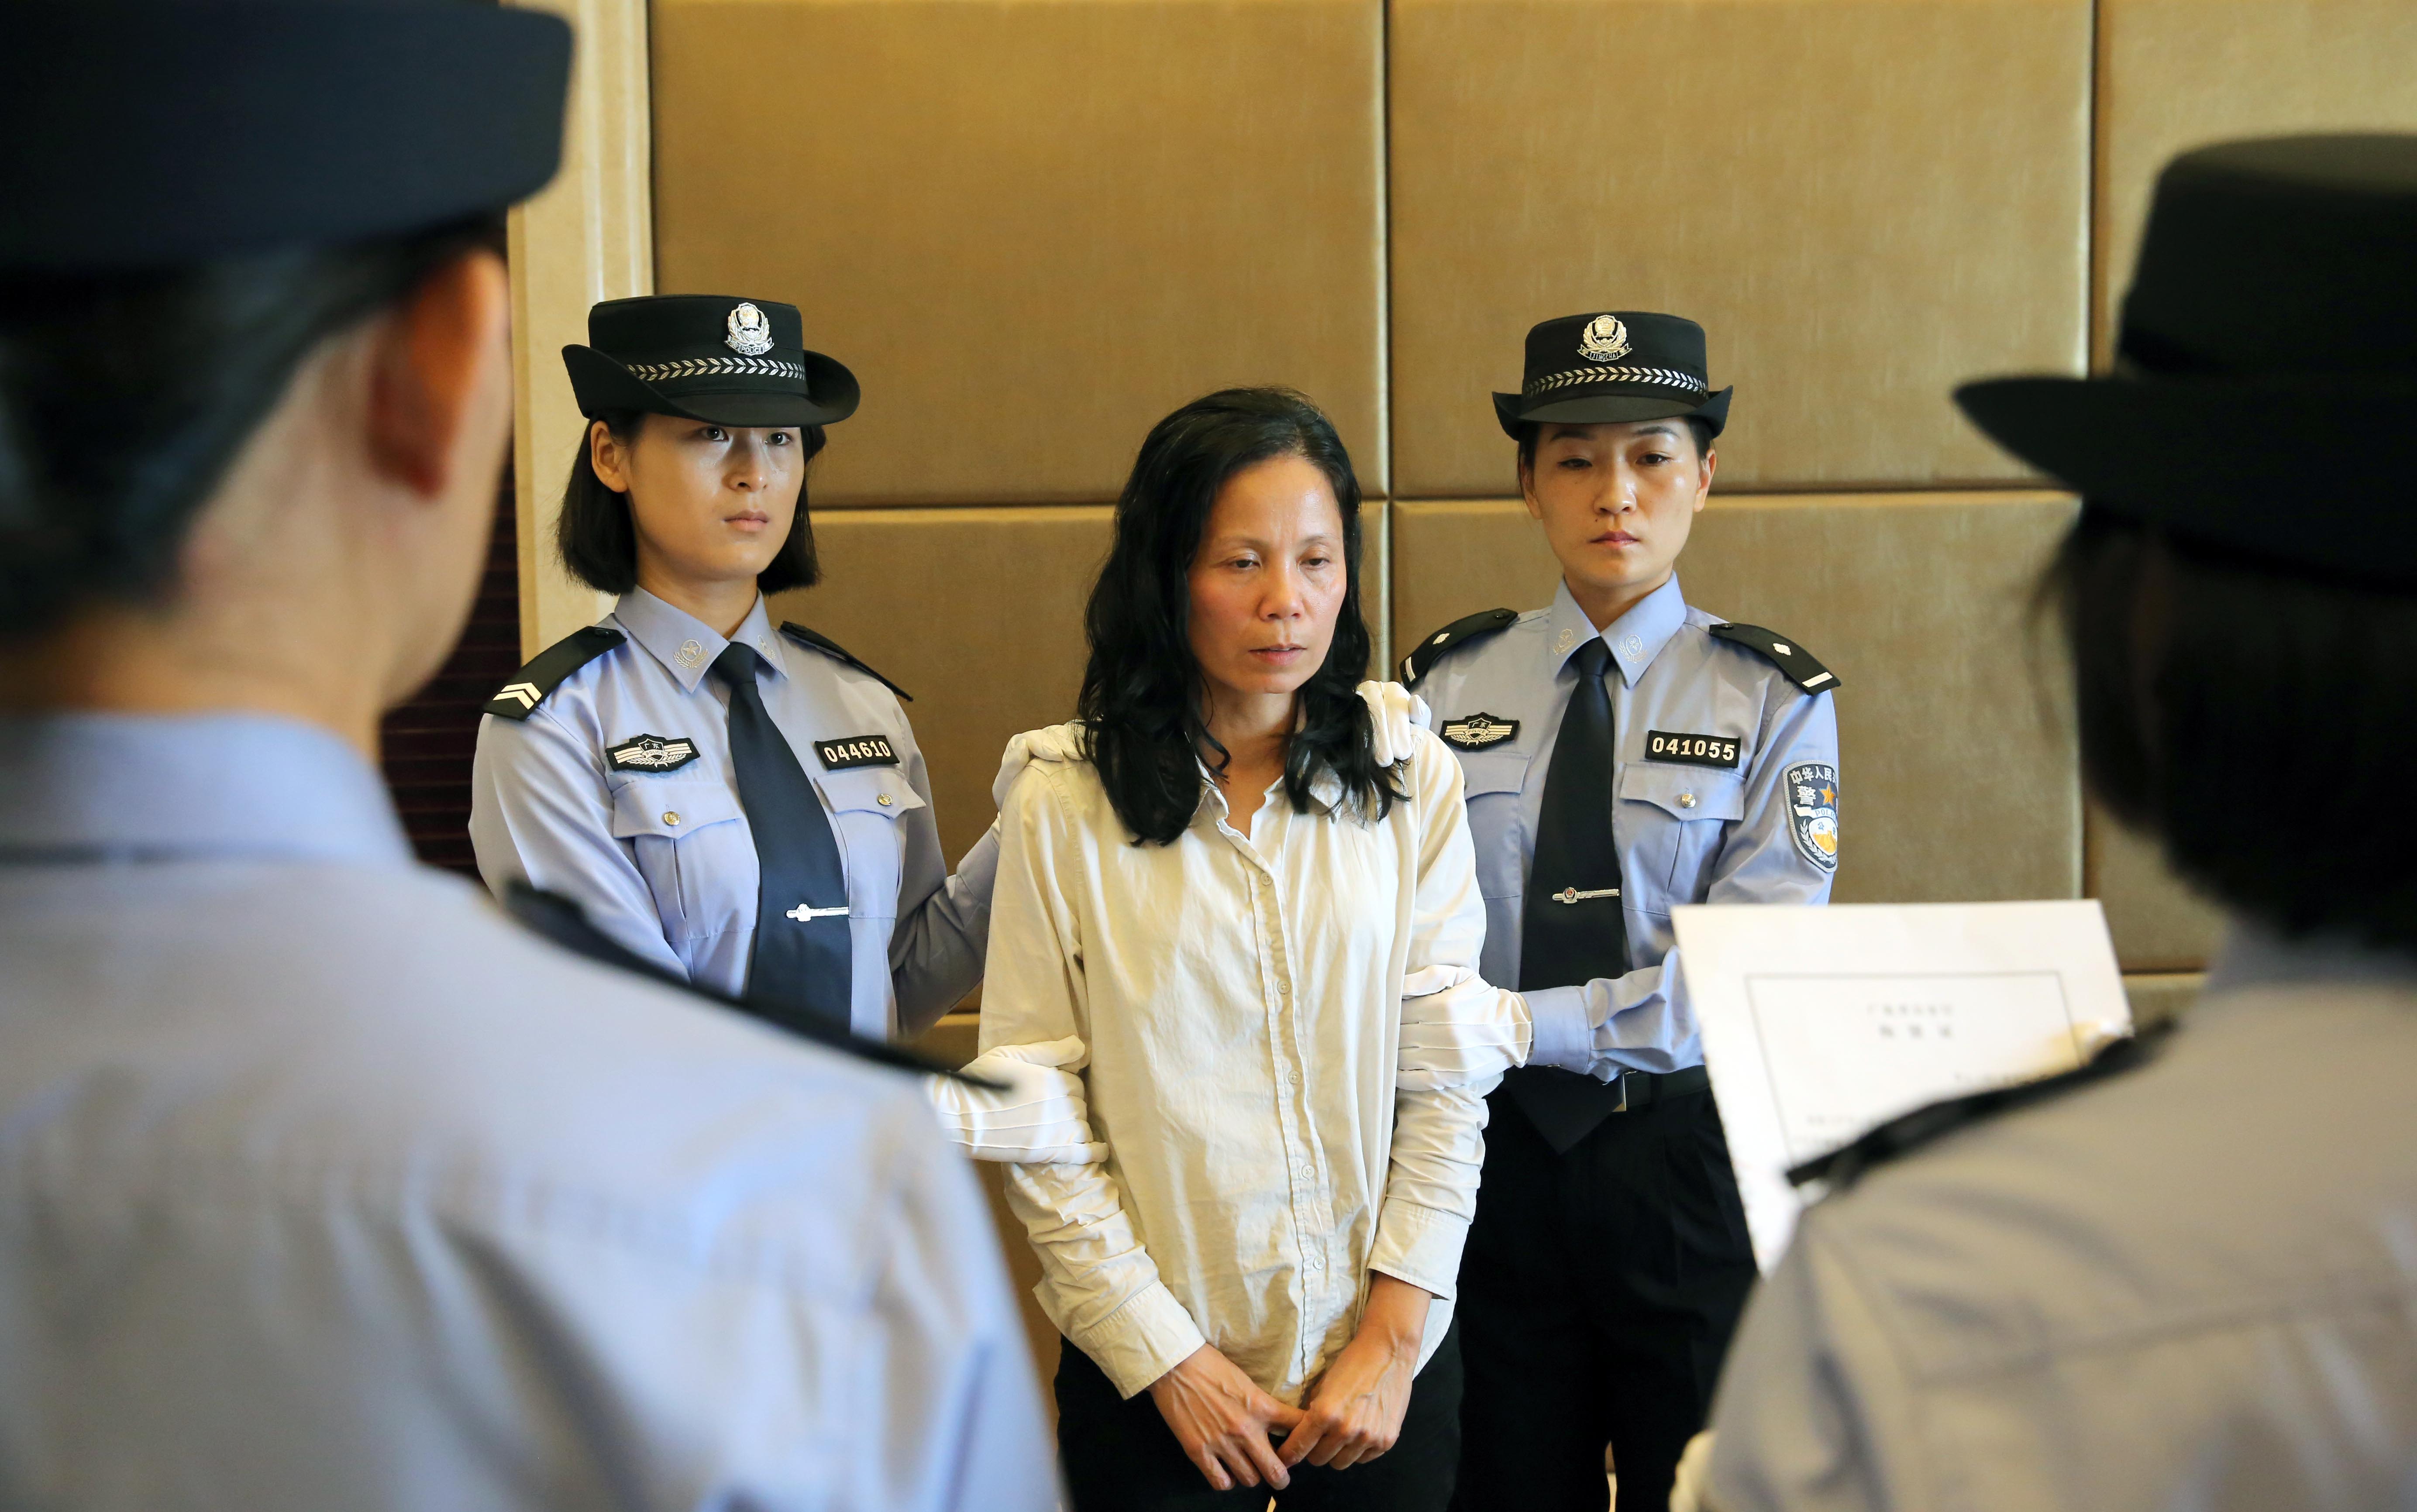 Corruption suspect Kuang Wanfang is detained after arriving at Changle Airport in Fuzhou, Fujian Province on Thursday. Photo: Xinhua 